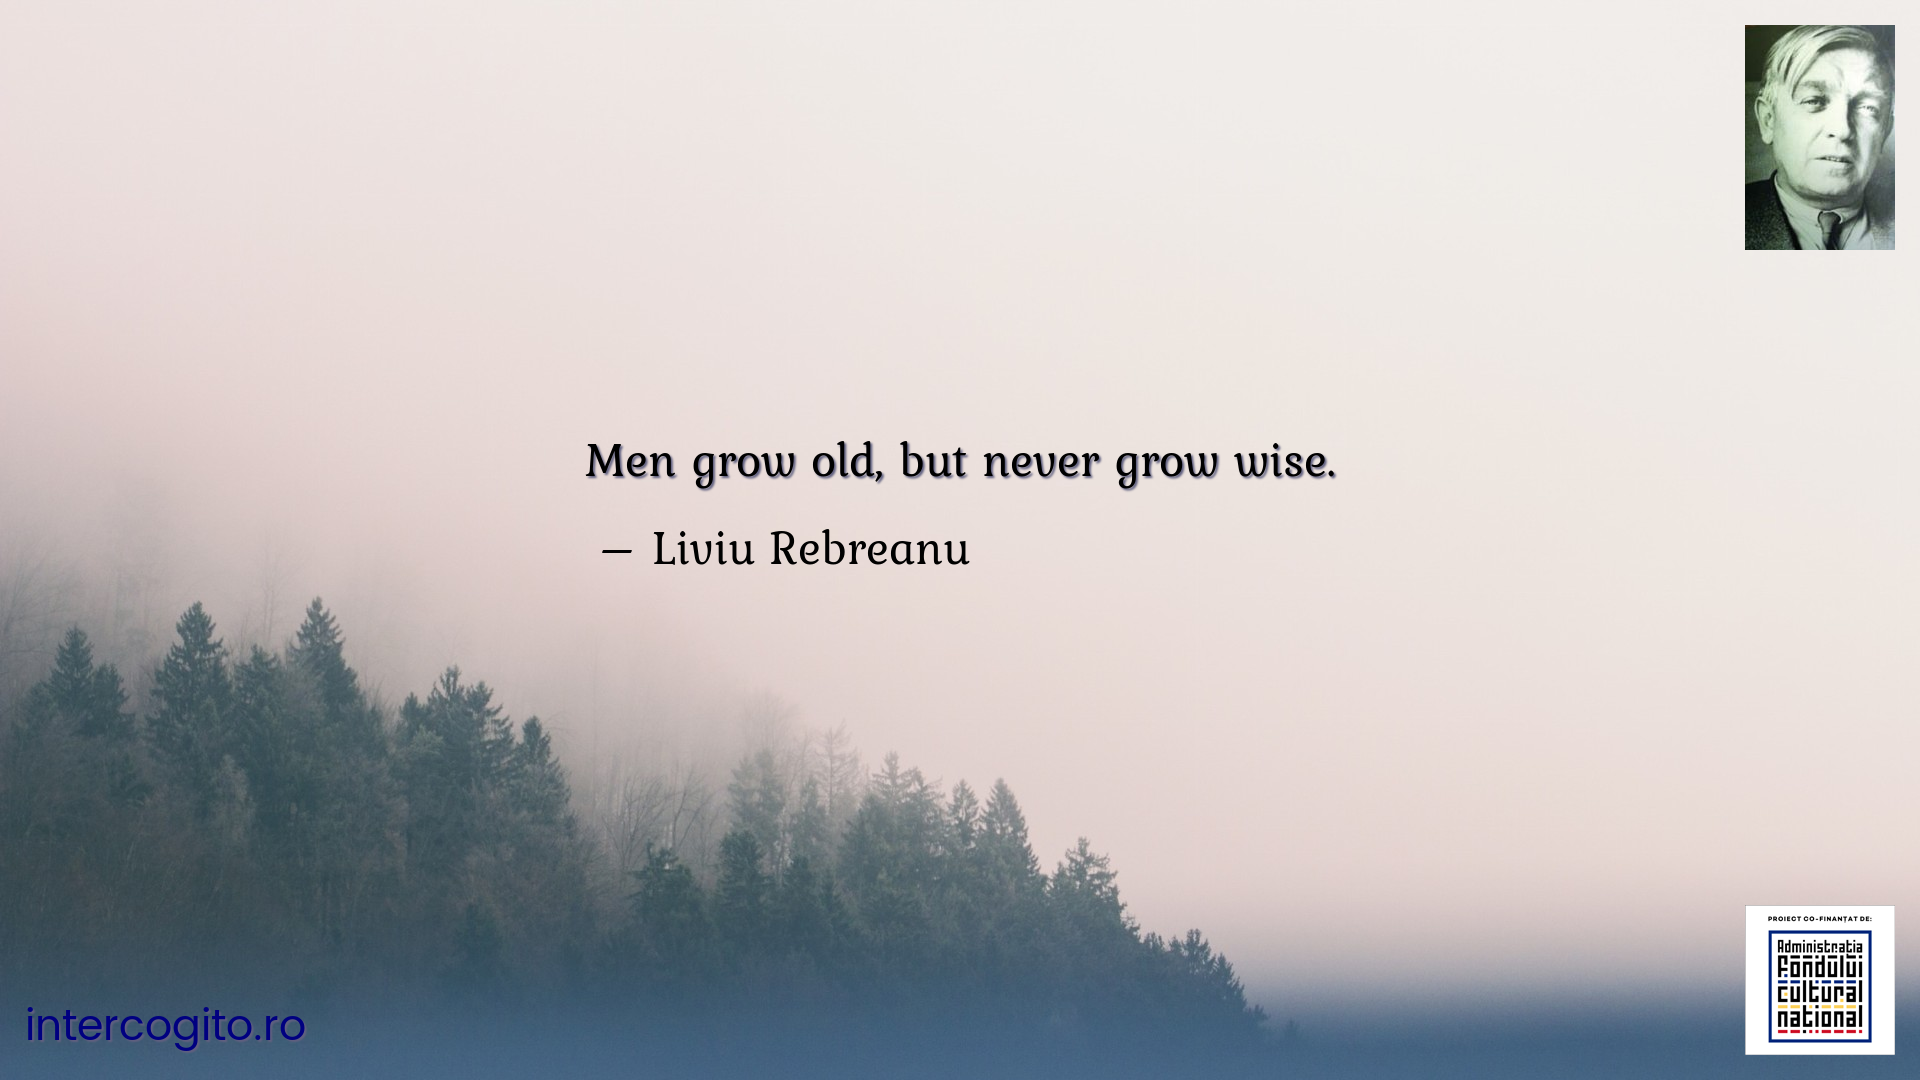 Men grow old, but never grow wise.